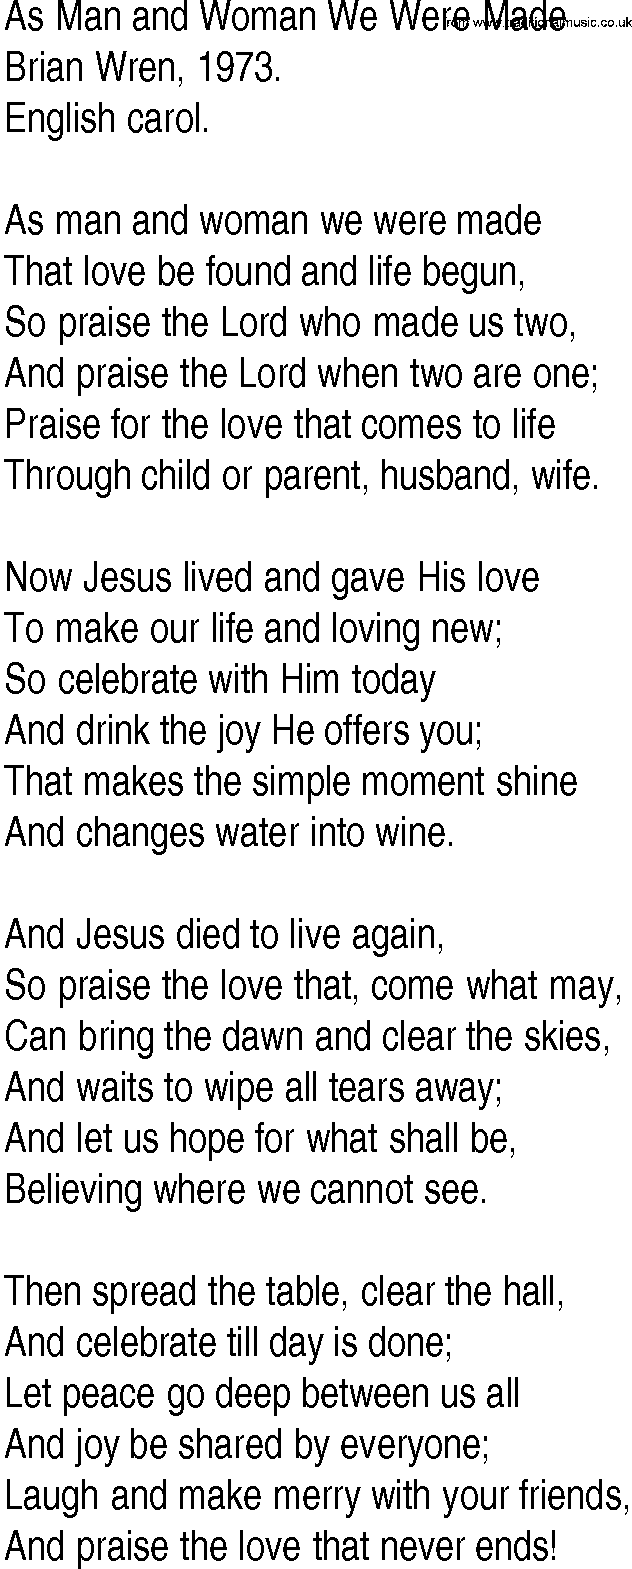 Hymn and Gospel Song: As Man and Woman We Were Made by Brian Wren lyrics